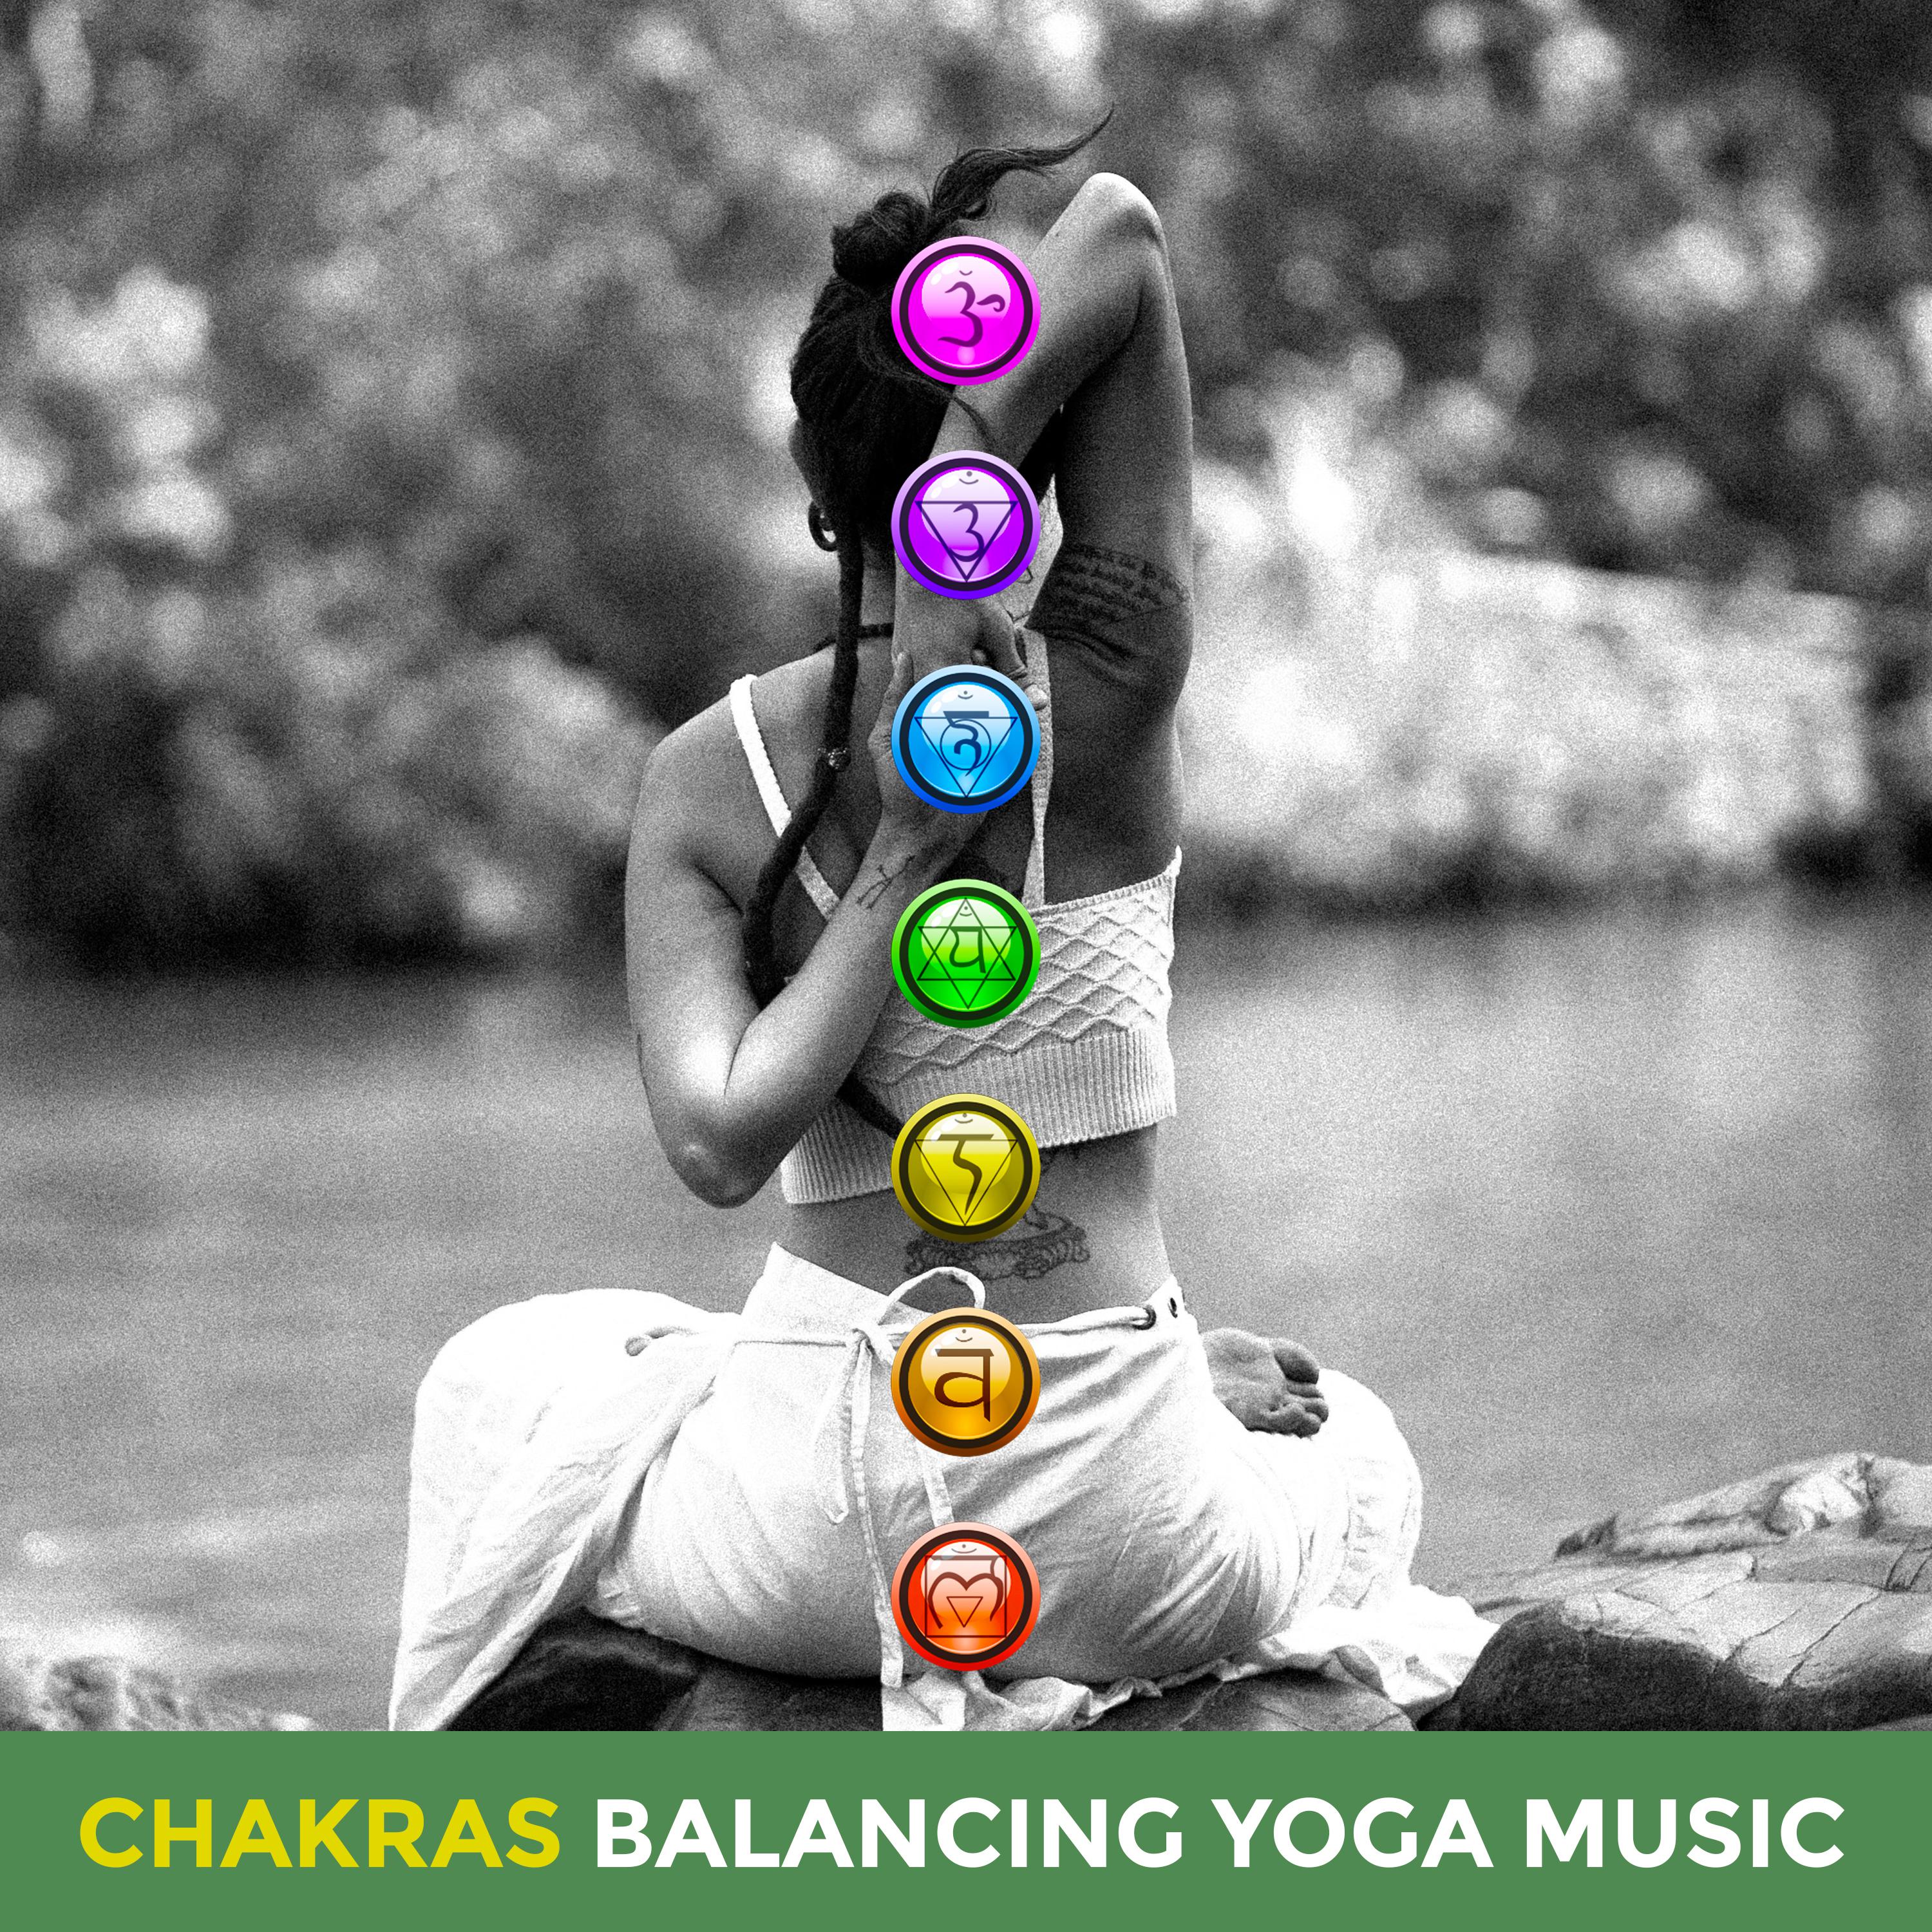 Chakras Balancing Yoga Music: 2019 New Age Songs for Perfect Meditation Experience, Third Eye Open, Kundalini, Zen Mindfulness Sounds, Deep Relaxation